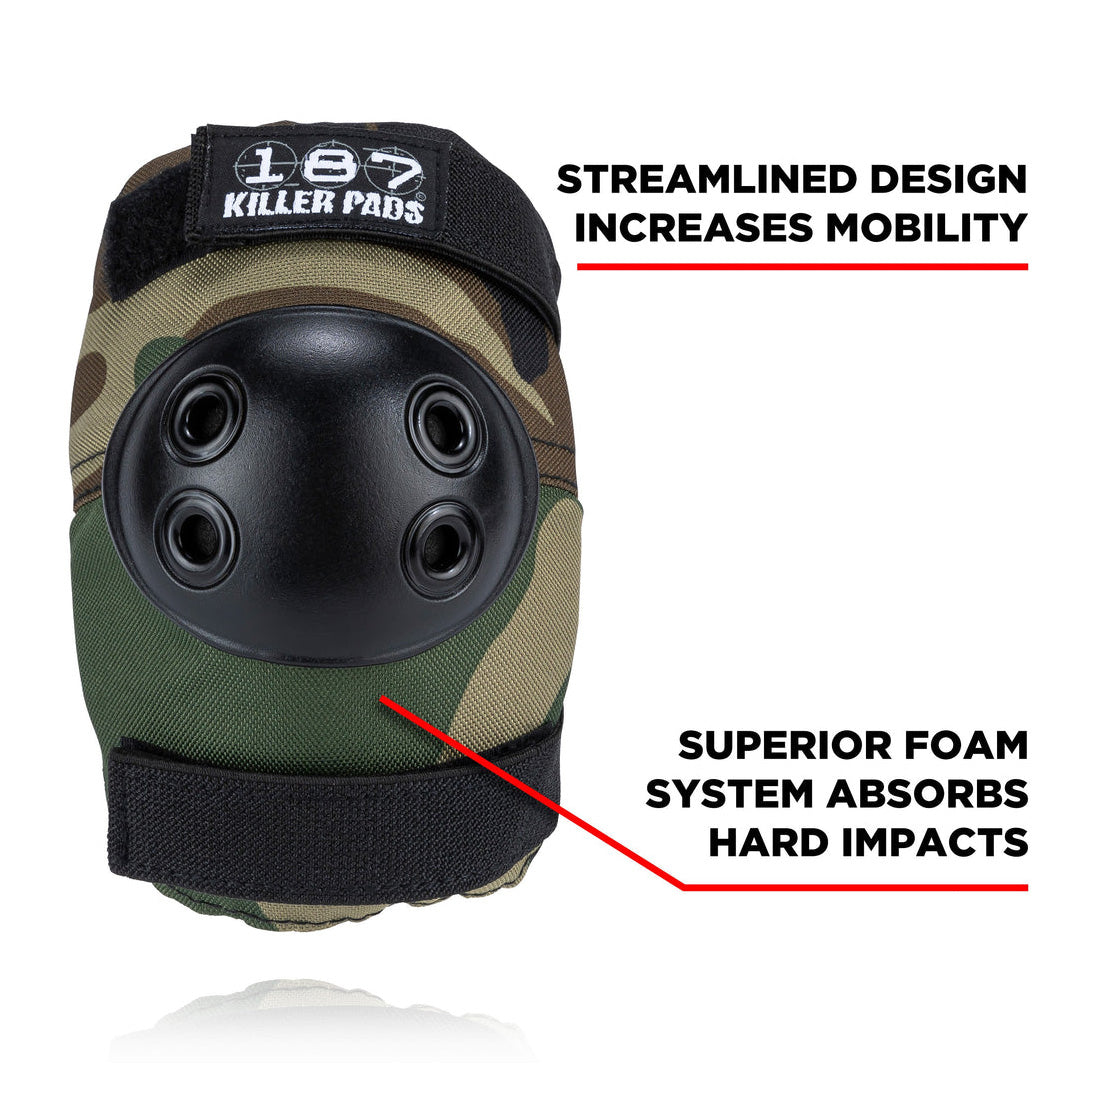 187 Knee/Elbow Combo Pack - Camo Protective Gear